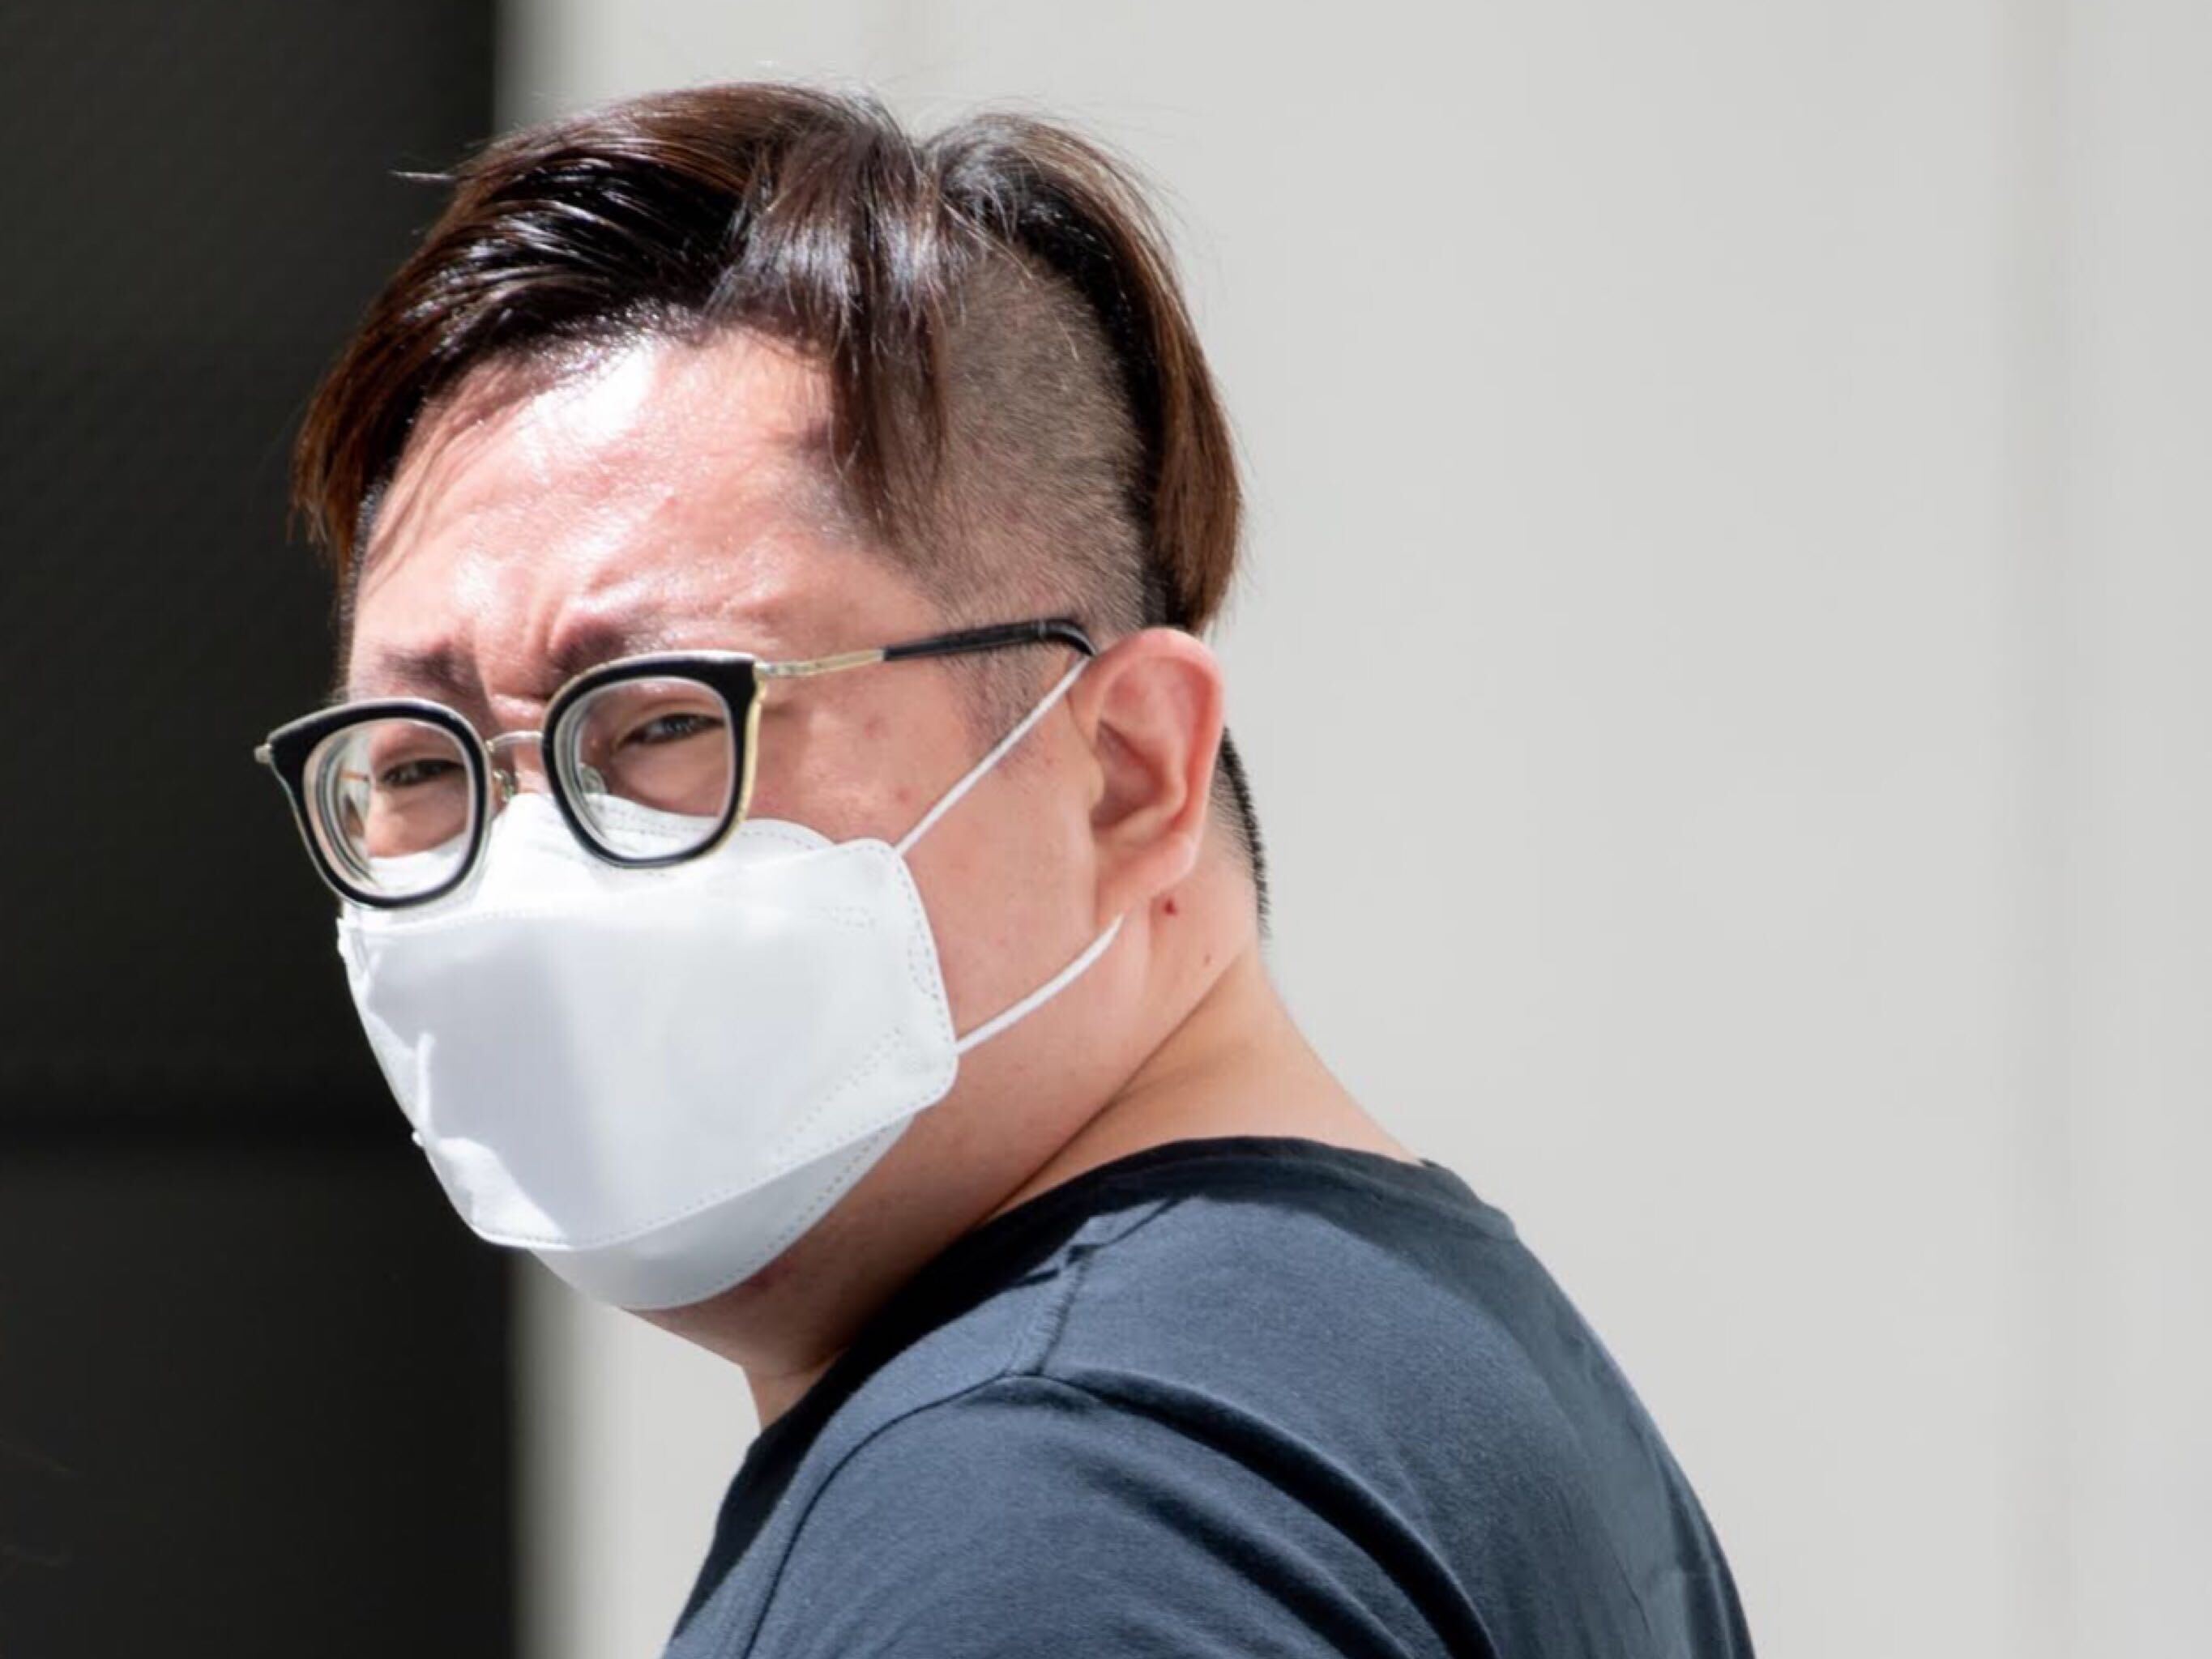 Ex-Singtel worker jailed for hacking into girlfriend's social media, accessing confidential telco records of man she texted